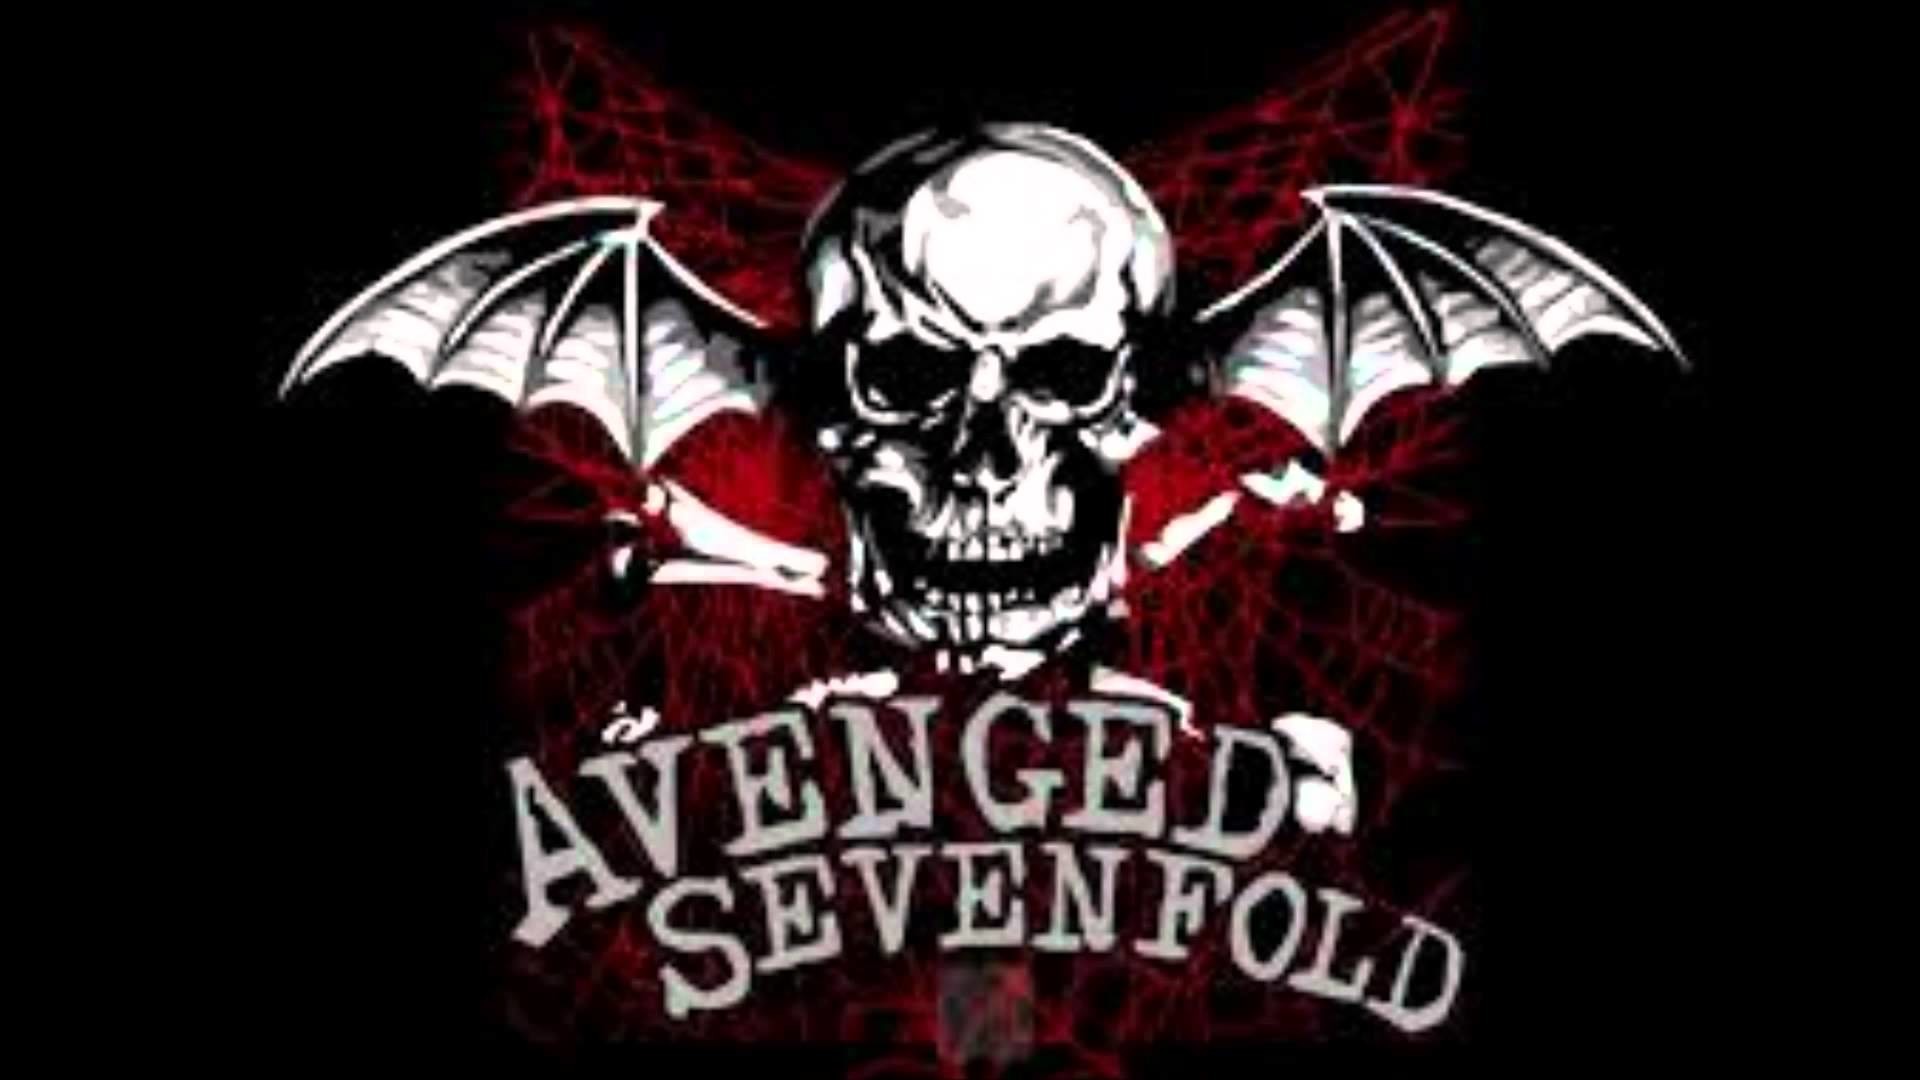 1920x1080 ... Avenged Sevenfold 2017 Wallpapers - Wallpaper Cave ...